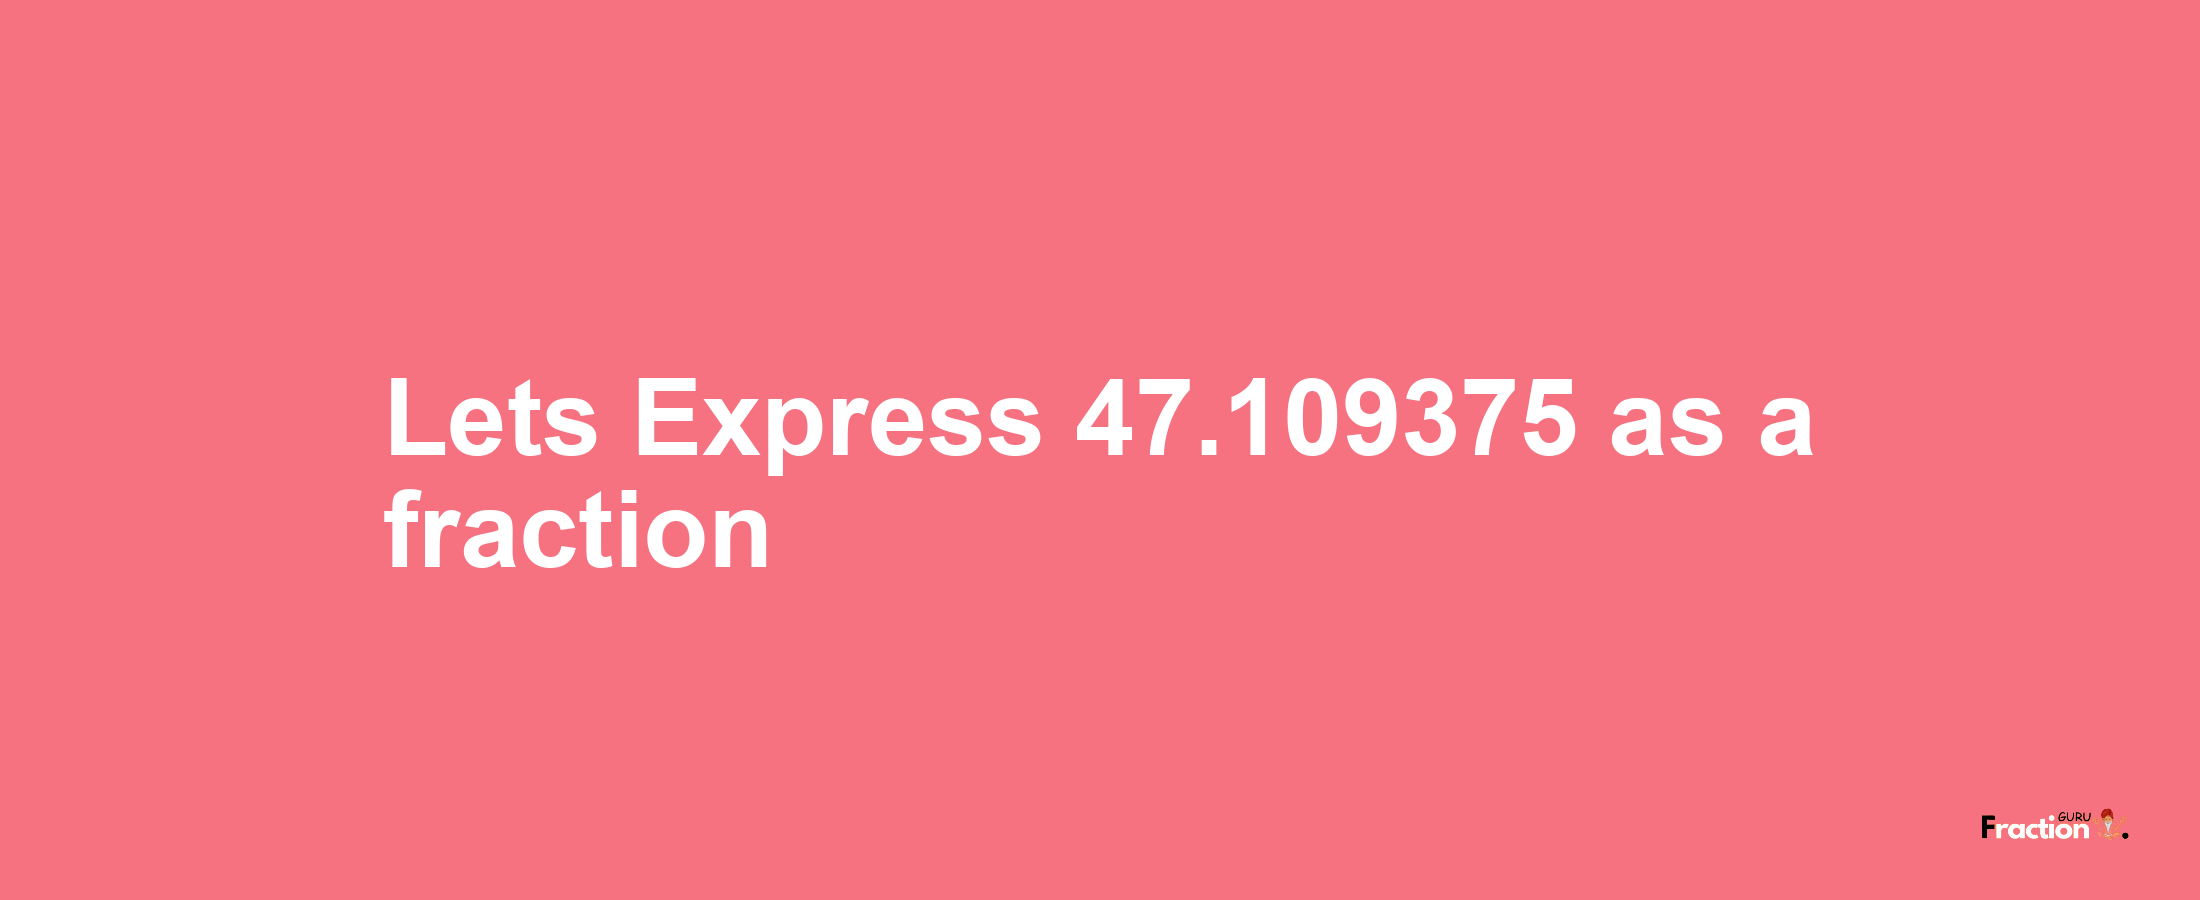 Lets Express 47.109375 as afraction